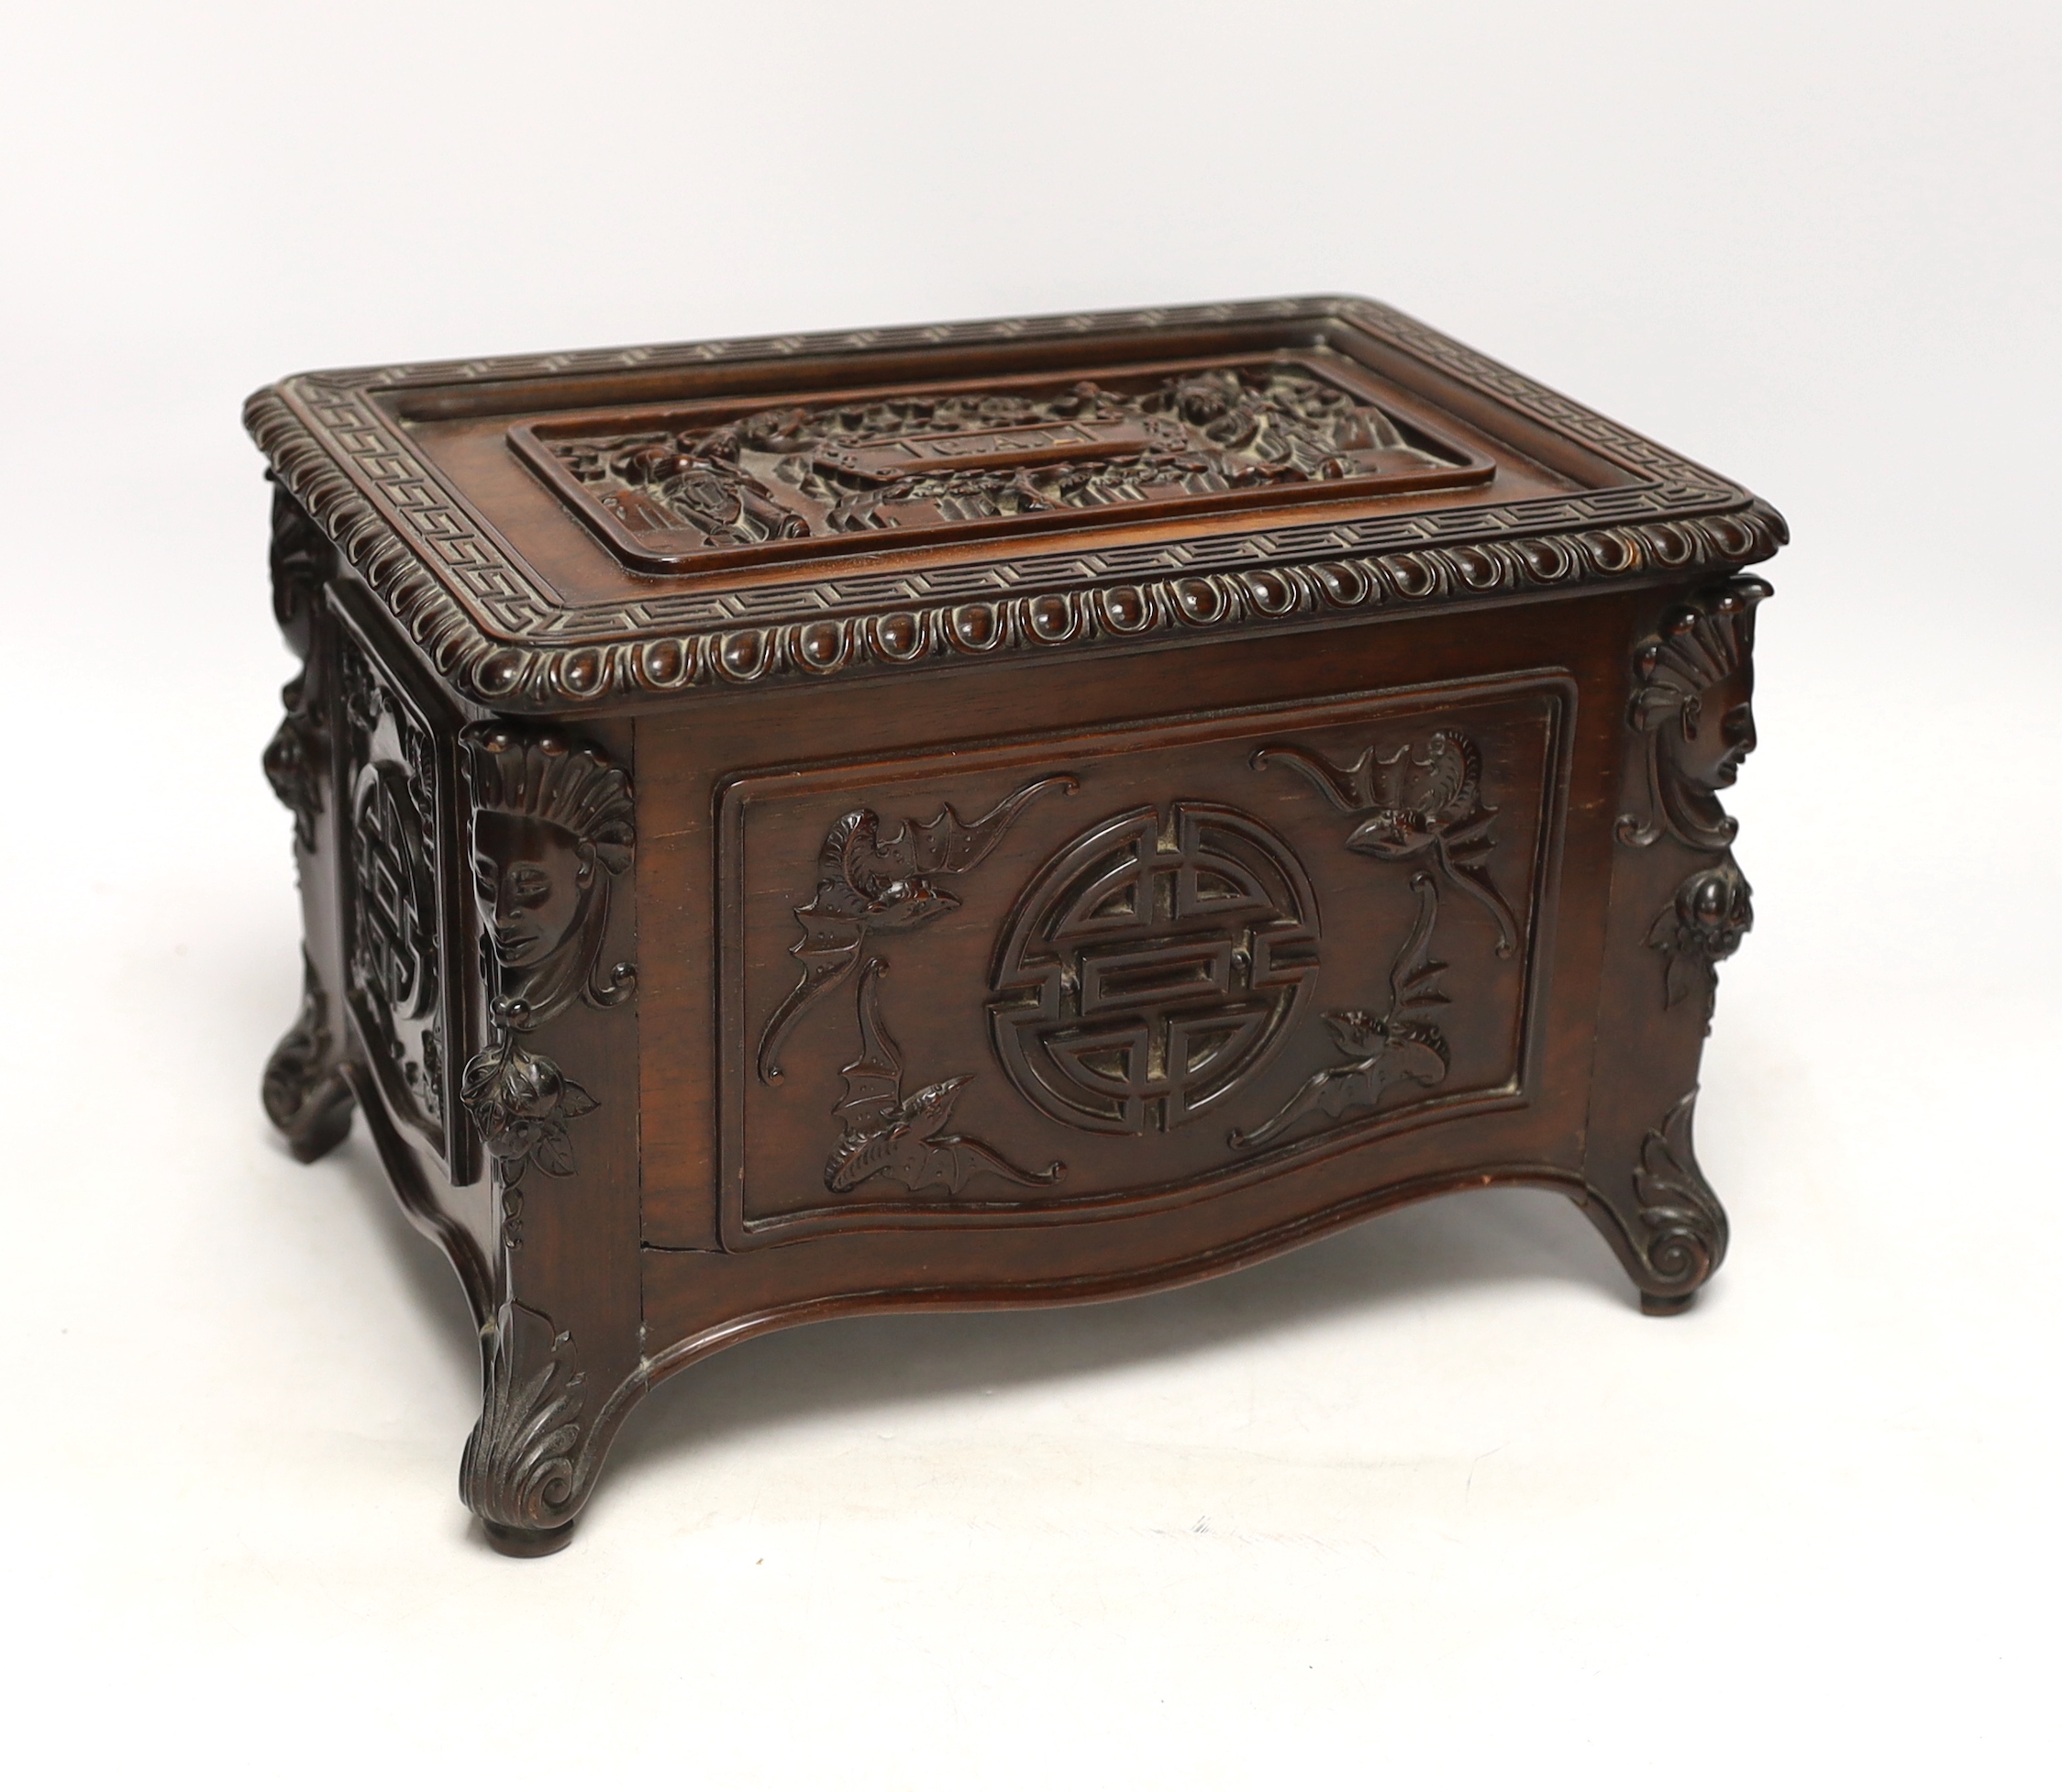 An early 20th century Chinese hongmu wood casket with removable lid and figurative heads on each corner, raised on four feet with G.A.L. carved into the lid, 30cm wide, 20.5cm deep, 20cm high